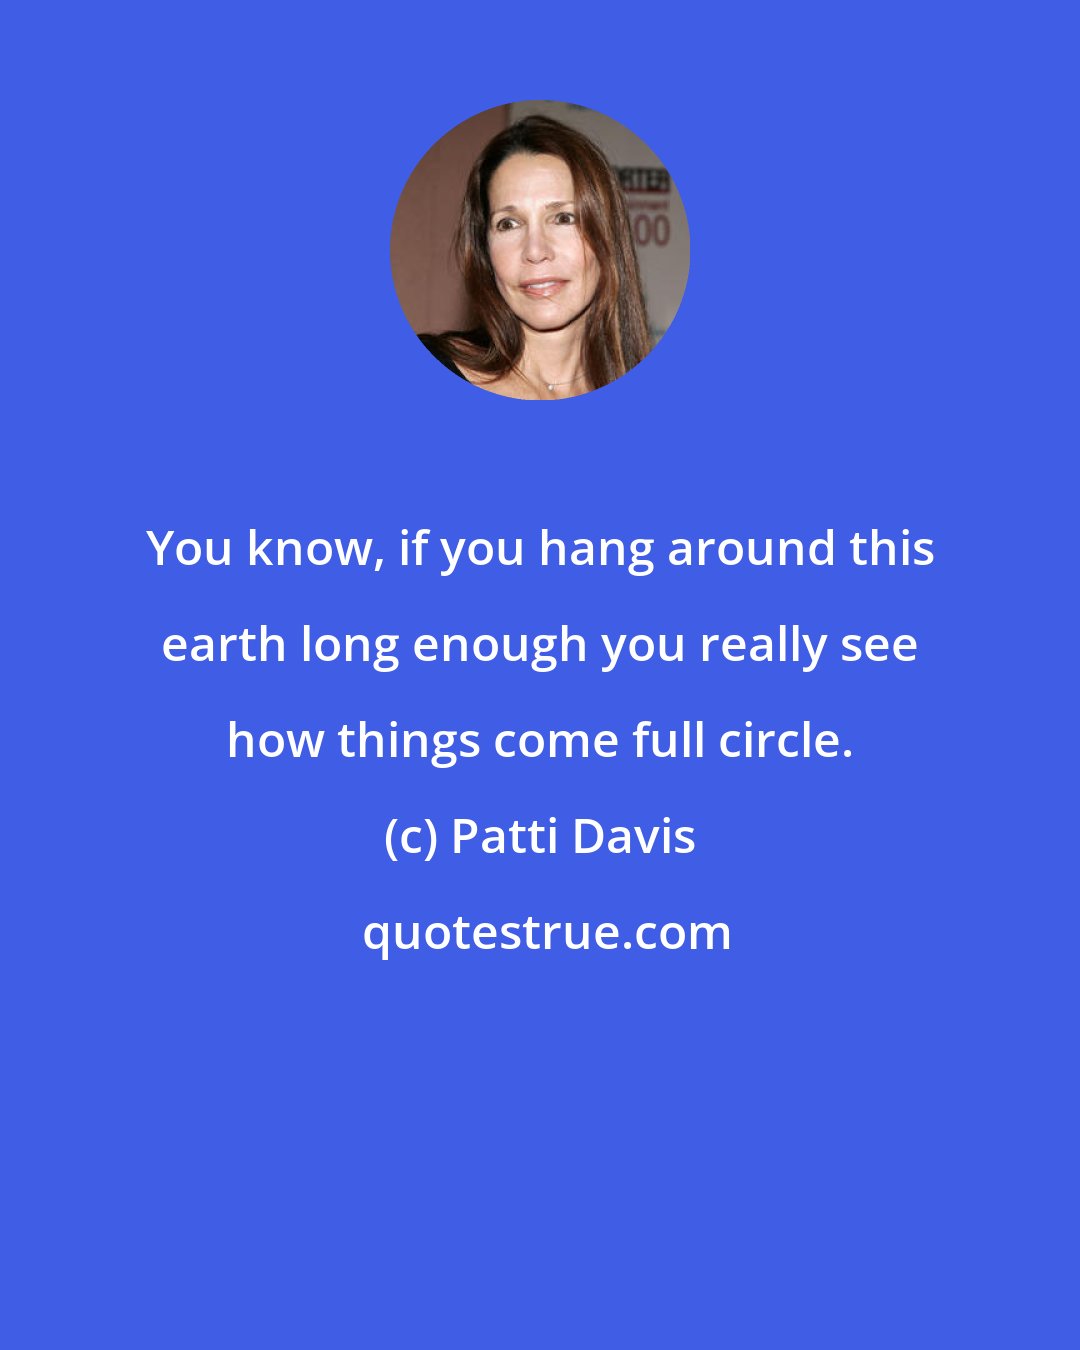 Patti Davis: You know, if you hang around this earth long enough you really see how things come full circle.